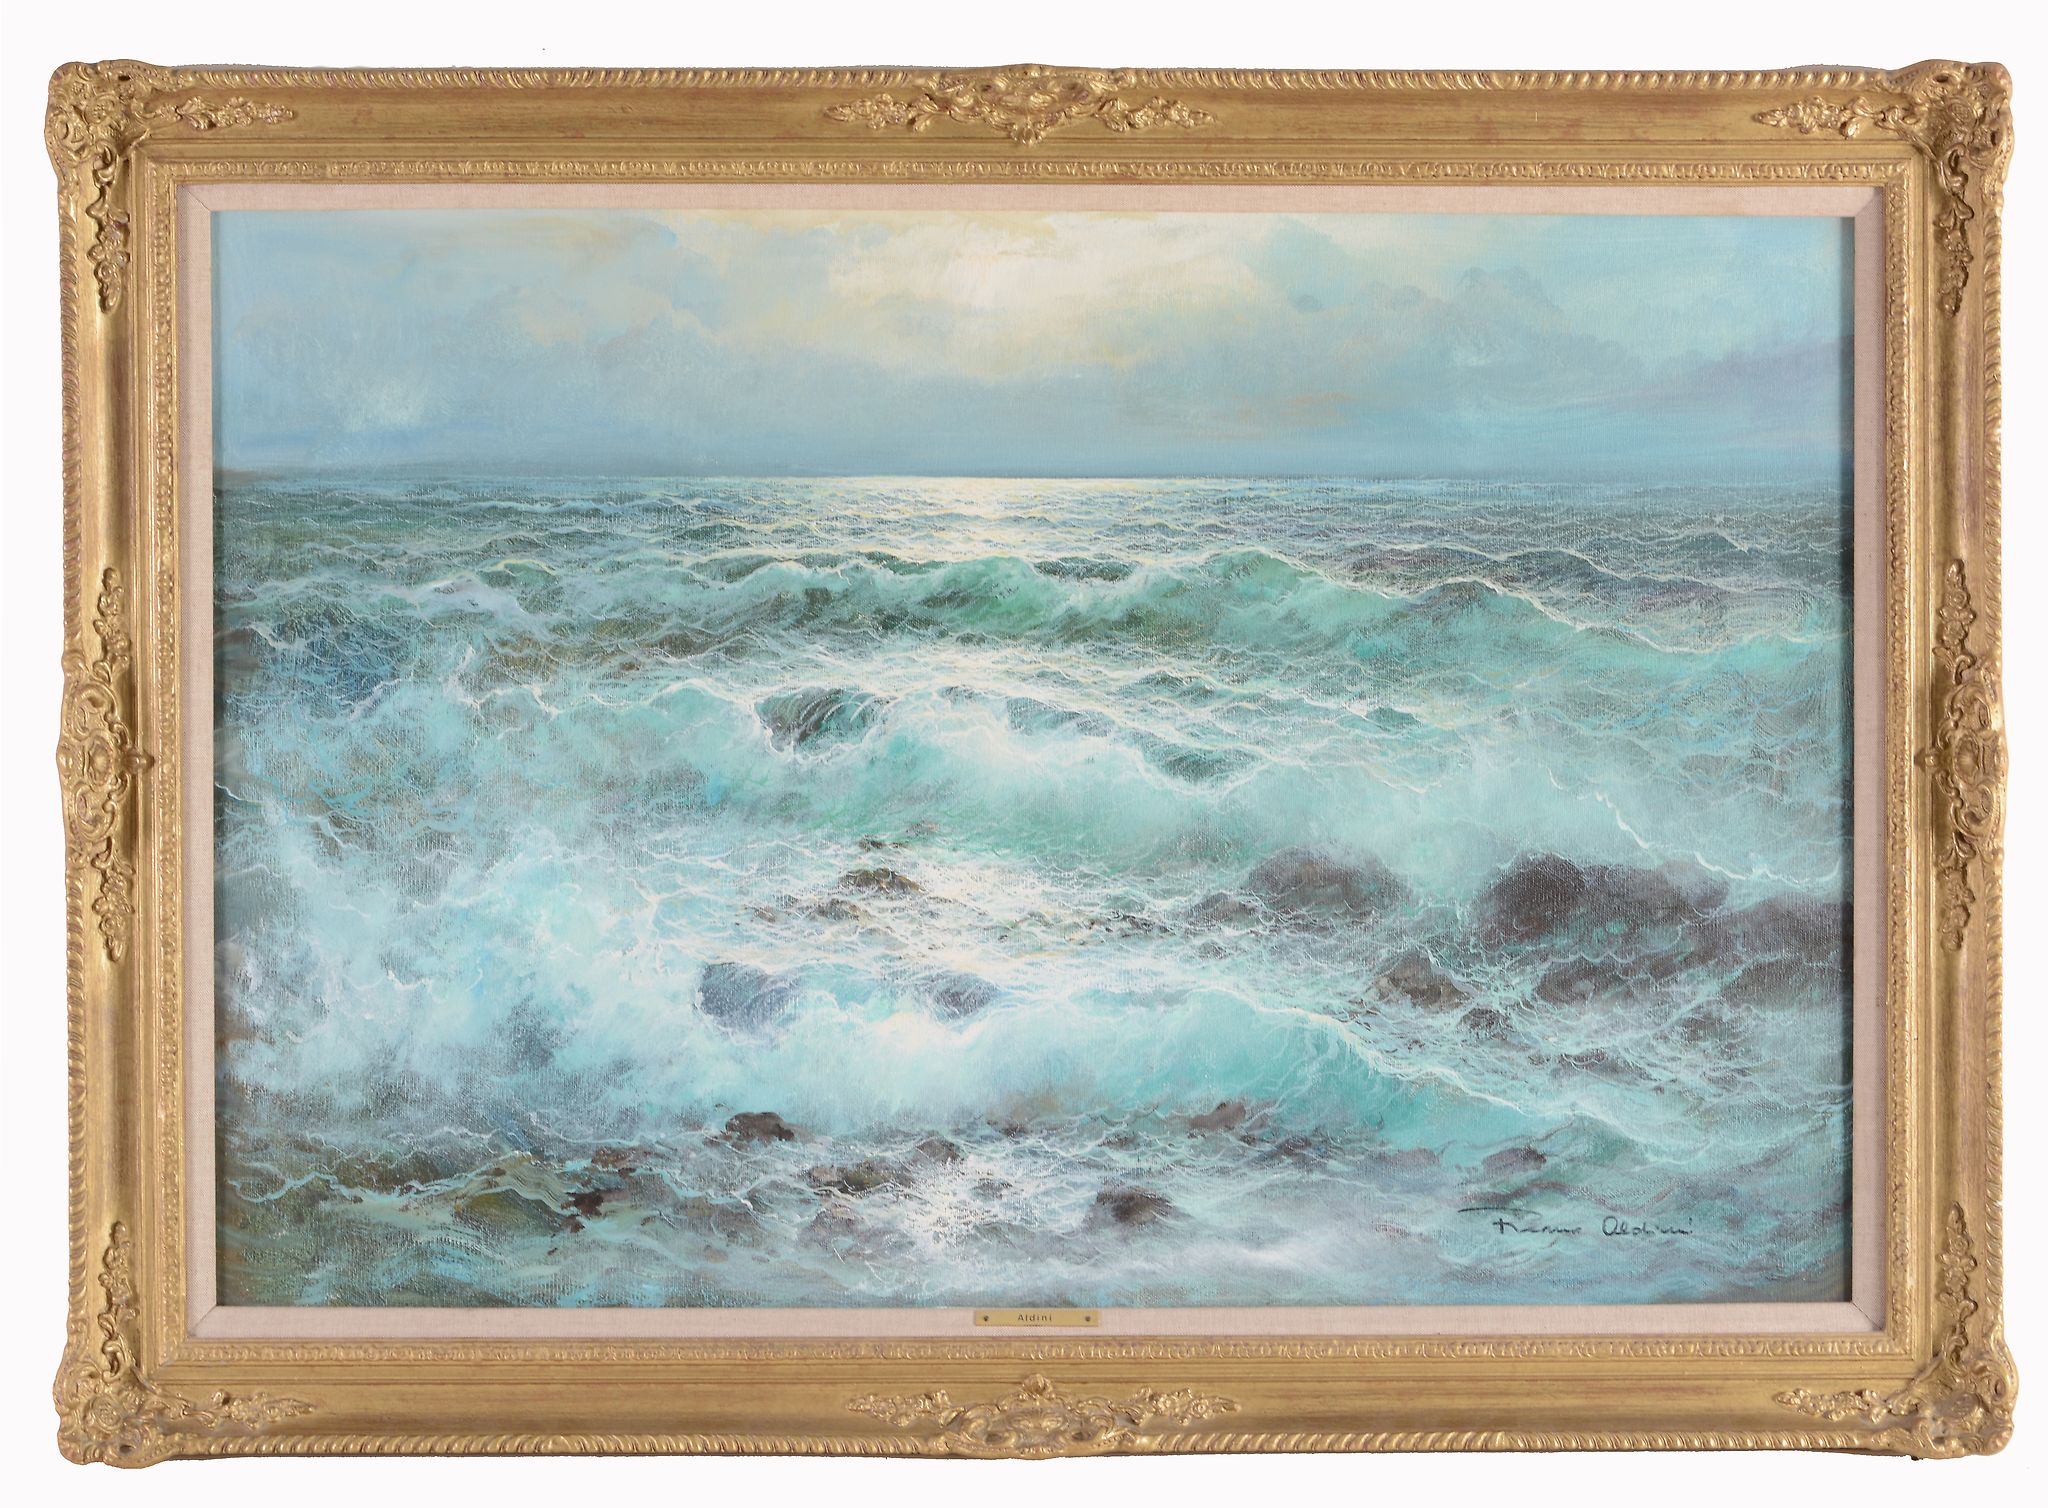 Remo Aldini (b.1943) - Waves Oil on canvas  Signed lower right 60.5 x 90 cm. (23 3/4 x 35 1/2 in) - Image 3 of 3